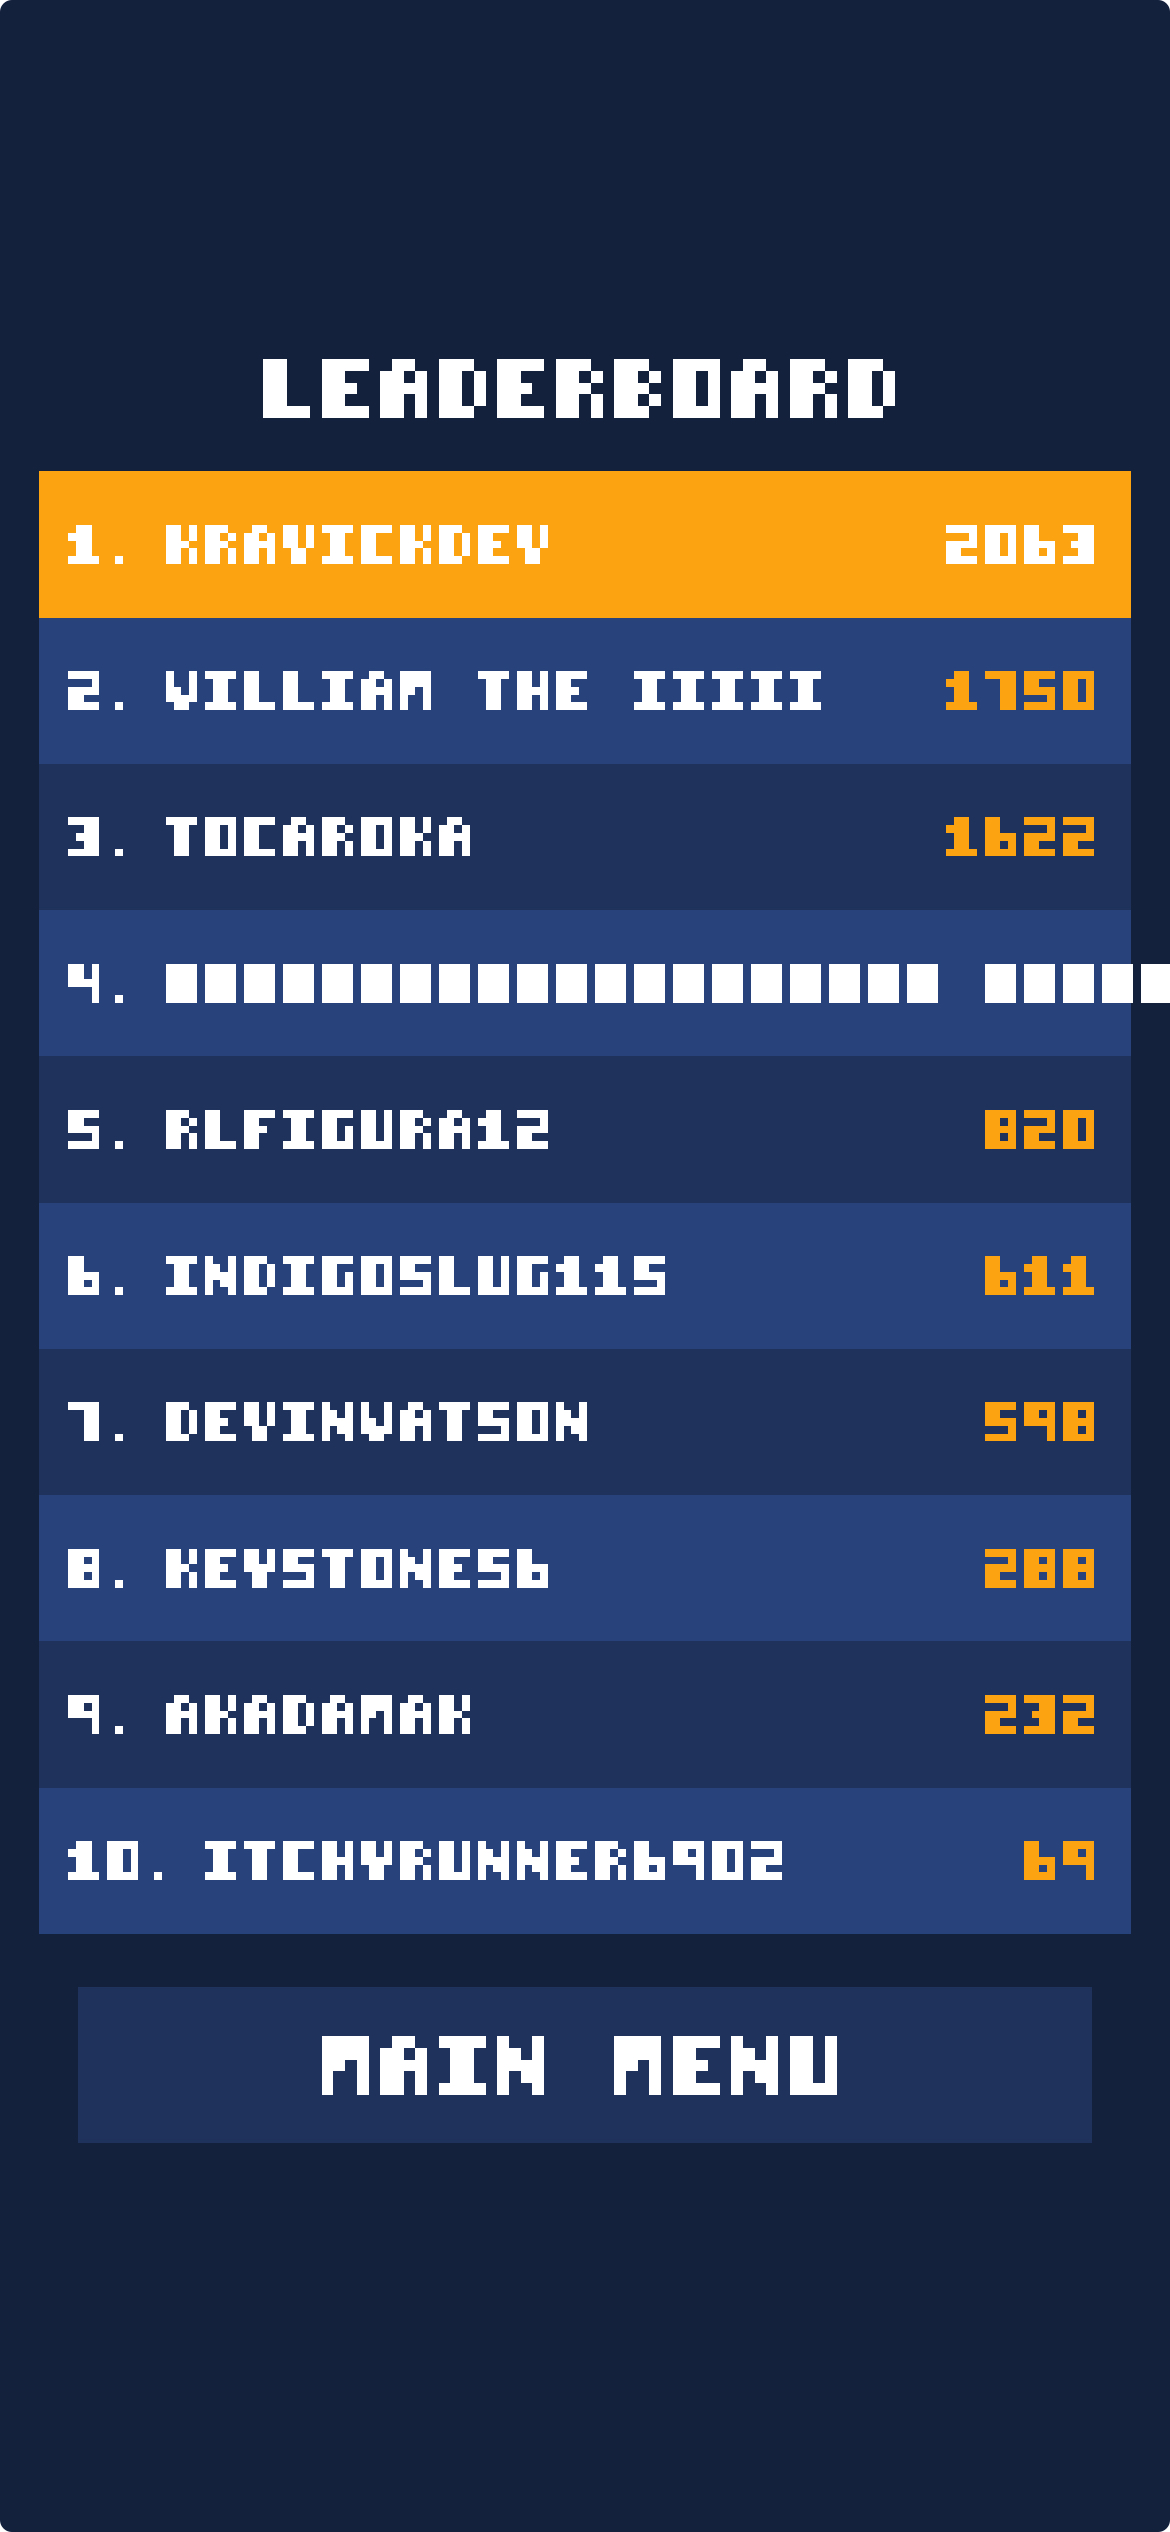 Long leaderboard name with unsupported characters